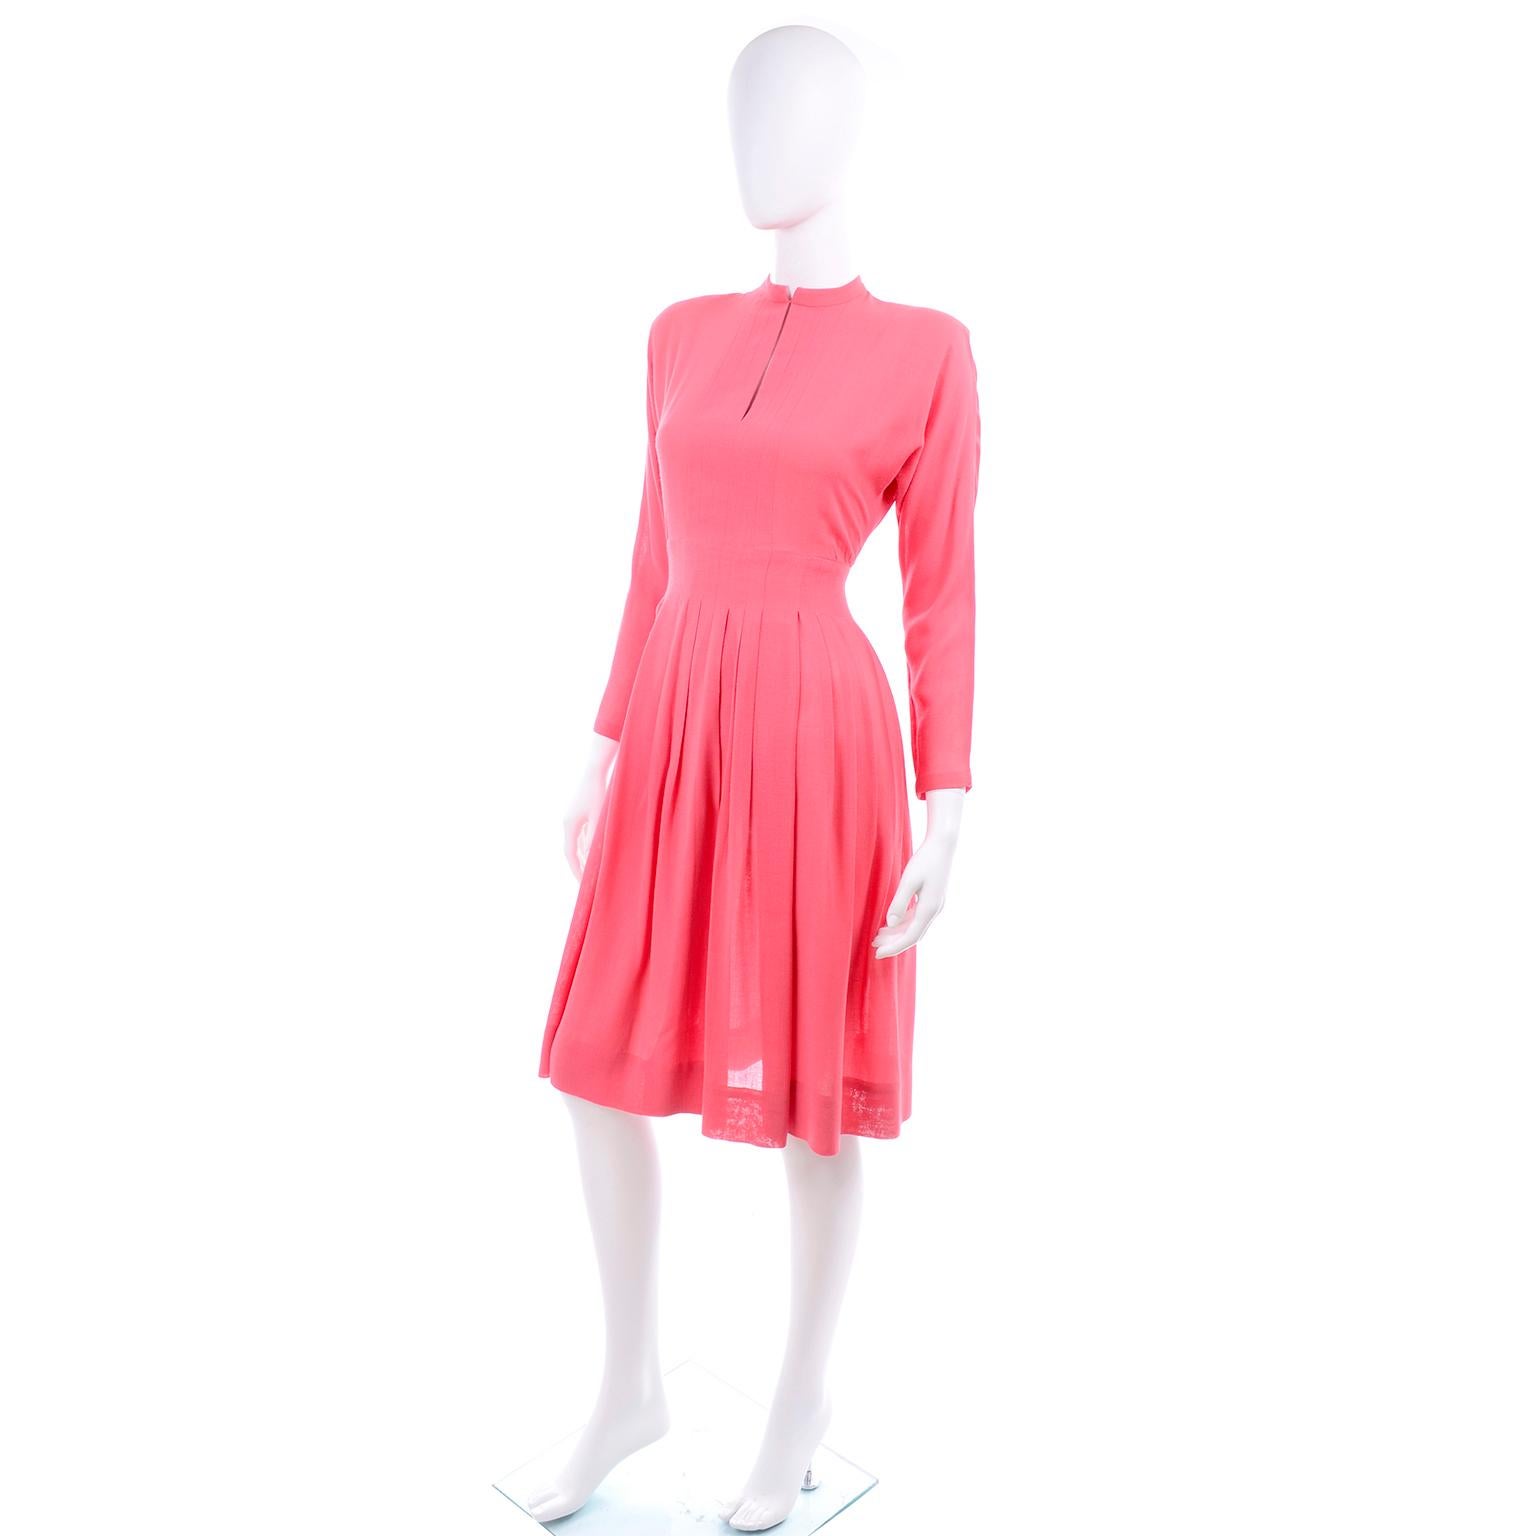 We love Pauline Trigere vintage dresses and this pretty salmon peachy pink vintage dress was purchased in the 1970's at Henry Harris of Cincinnati.  The dress has dolman sleeves, pretty pleating, a key-hole slit in the bodice and it closes with a